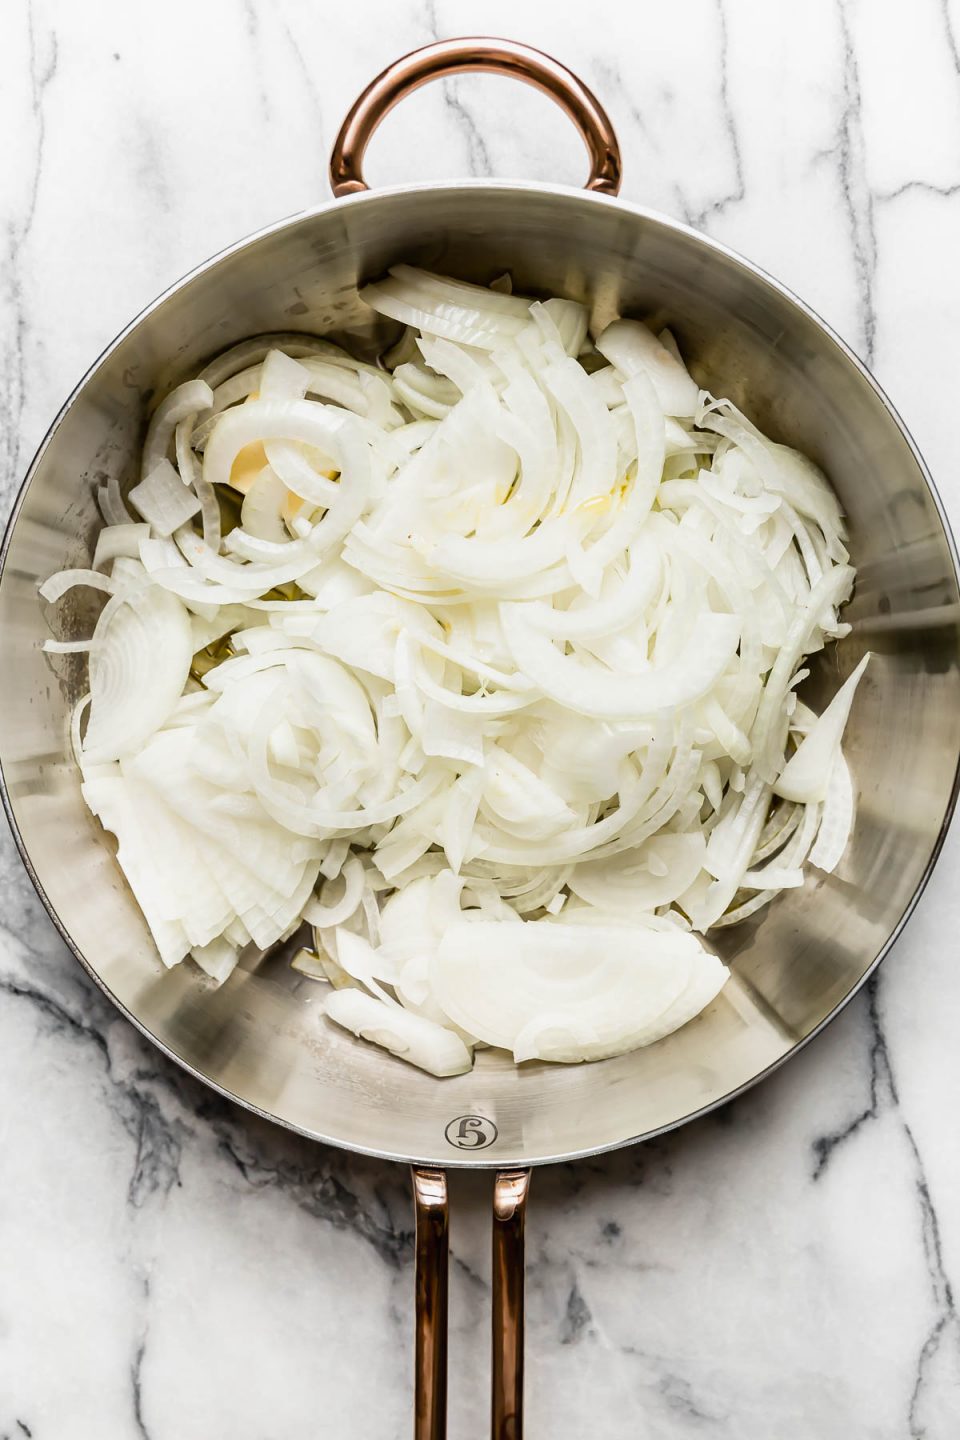 Thinly sliced yellow onion in a large pan before caramelizing.